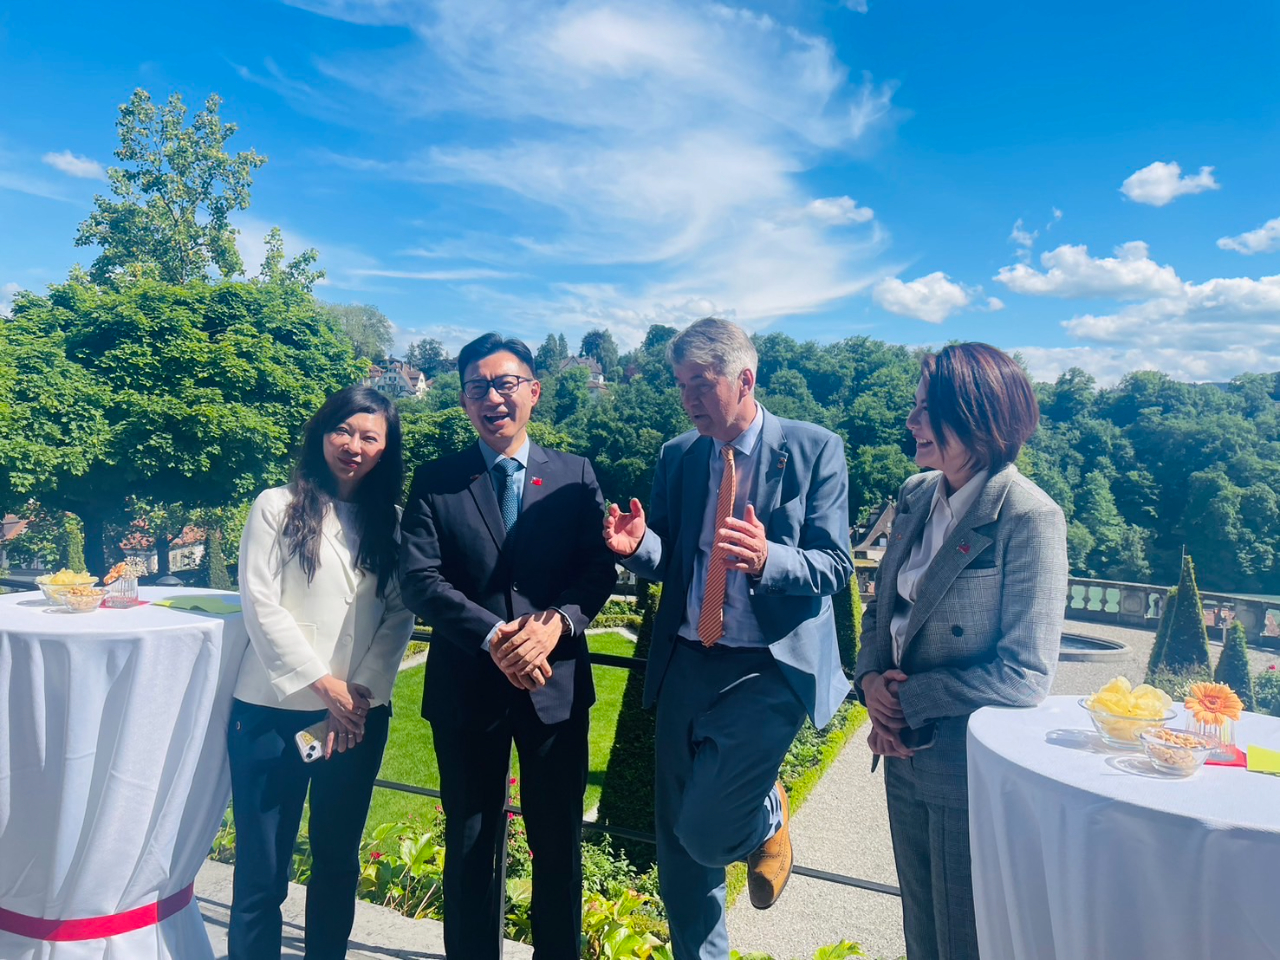 Johnny Chiang, the Vice President of Legislative Yuan, led a parliamentarian delegation to Bern and met with Mayor of Bern, Mr. Alex von Graffenried.